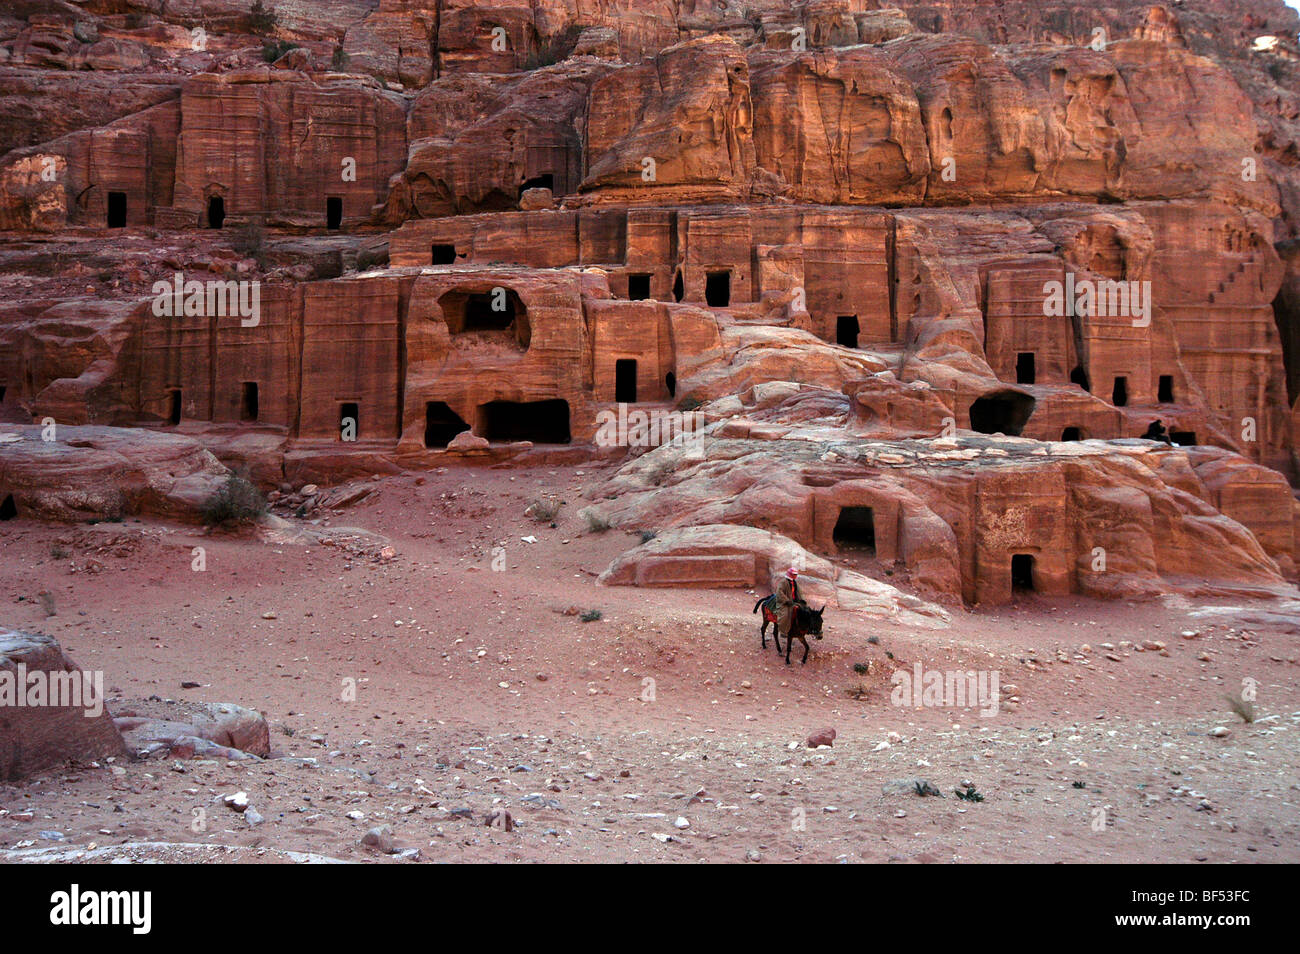 A bedouin rides his horse in front of the tombs on the Street of Facades, Petra, Jordan Stock Photo